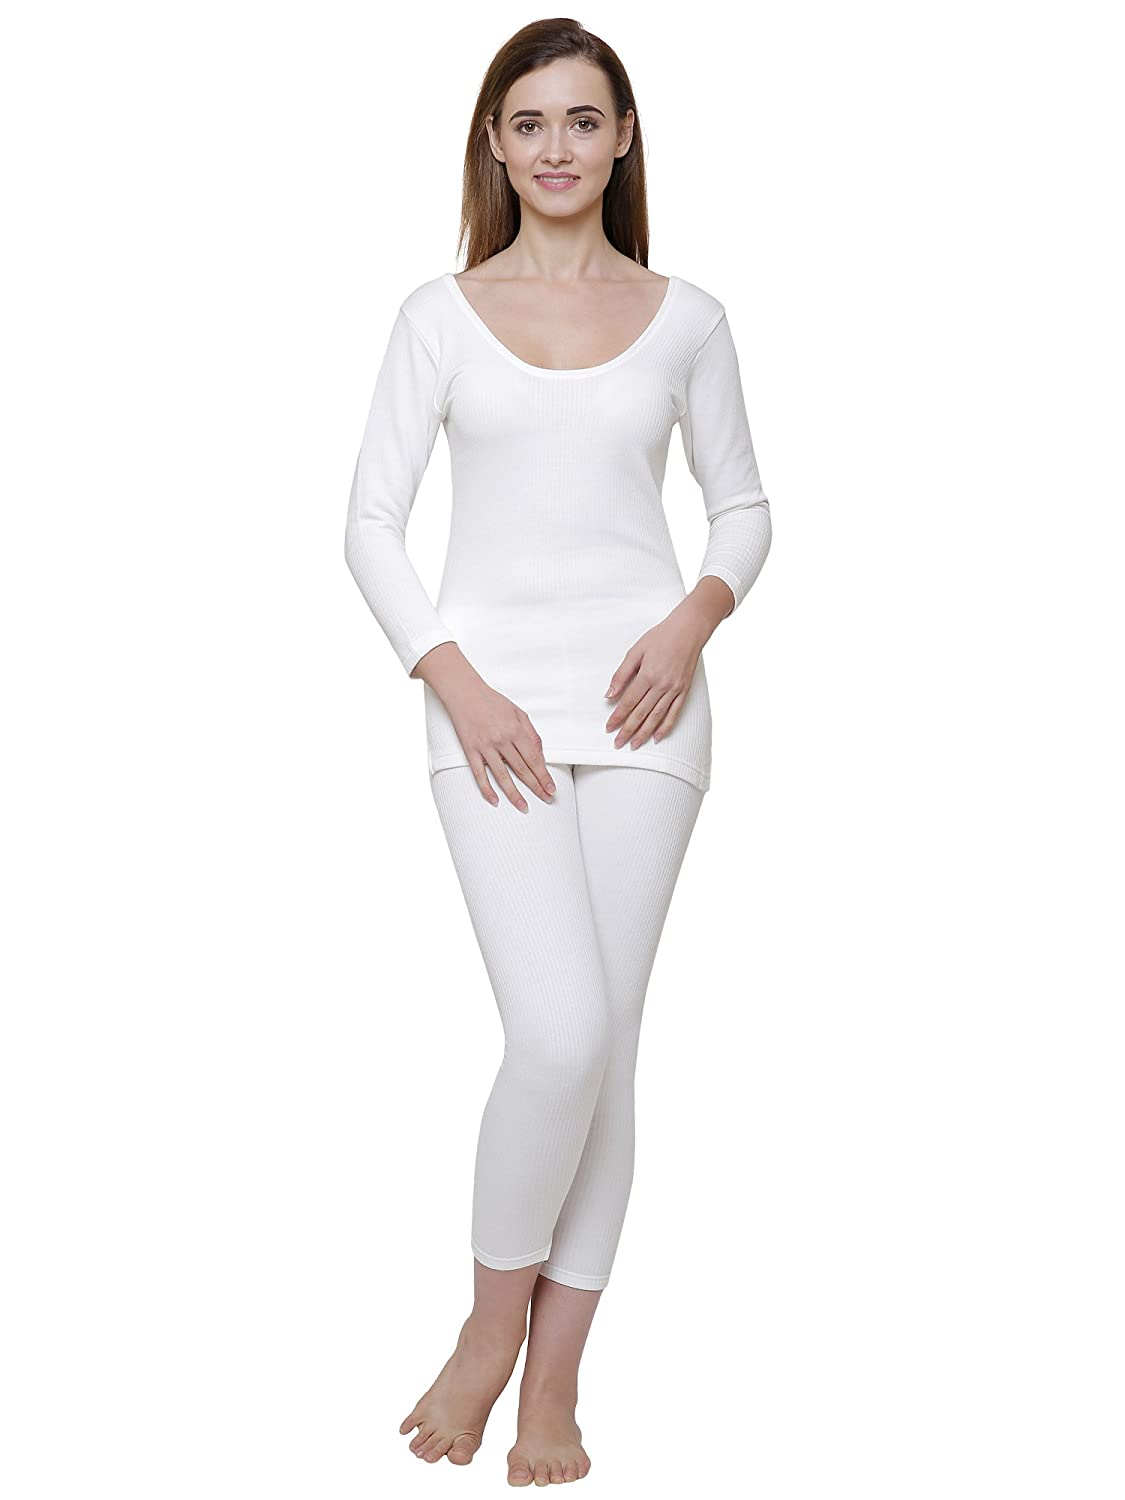 Wool Touch Body Warmer For Women Thermal Sets